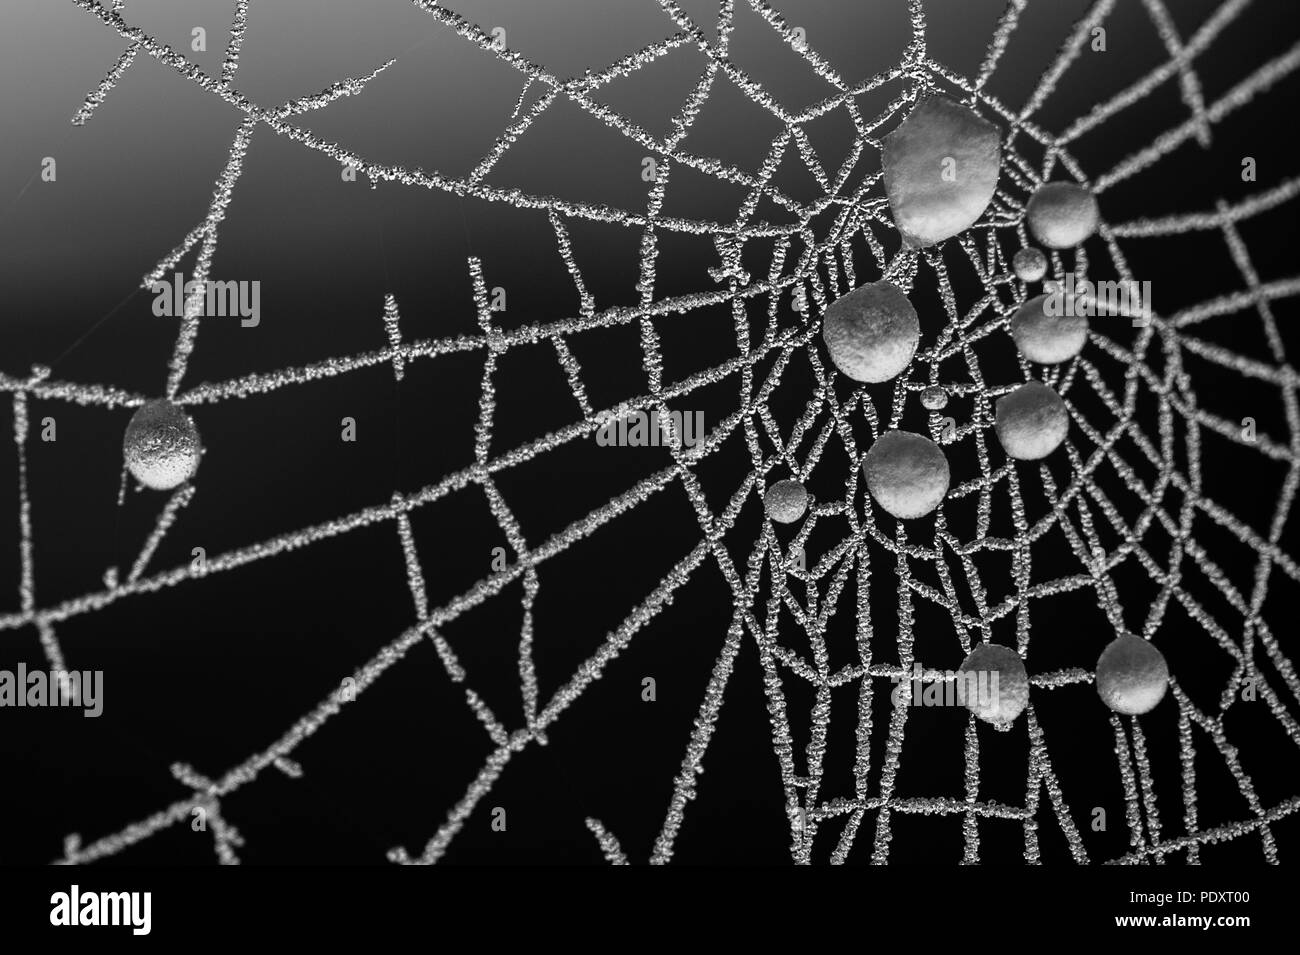 Close-up spider web at sunrise with frost on web and frozen water droplets. Stock Photo